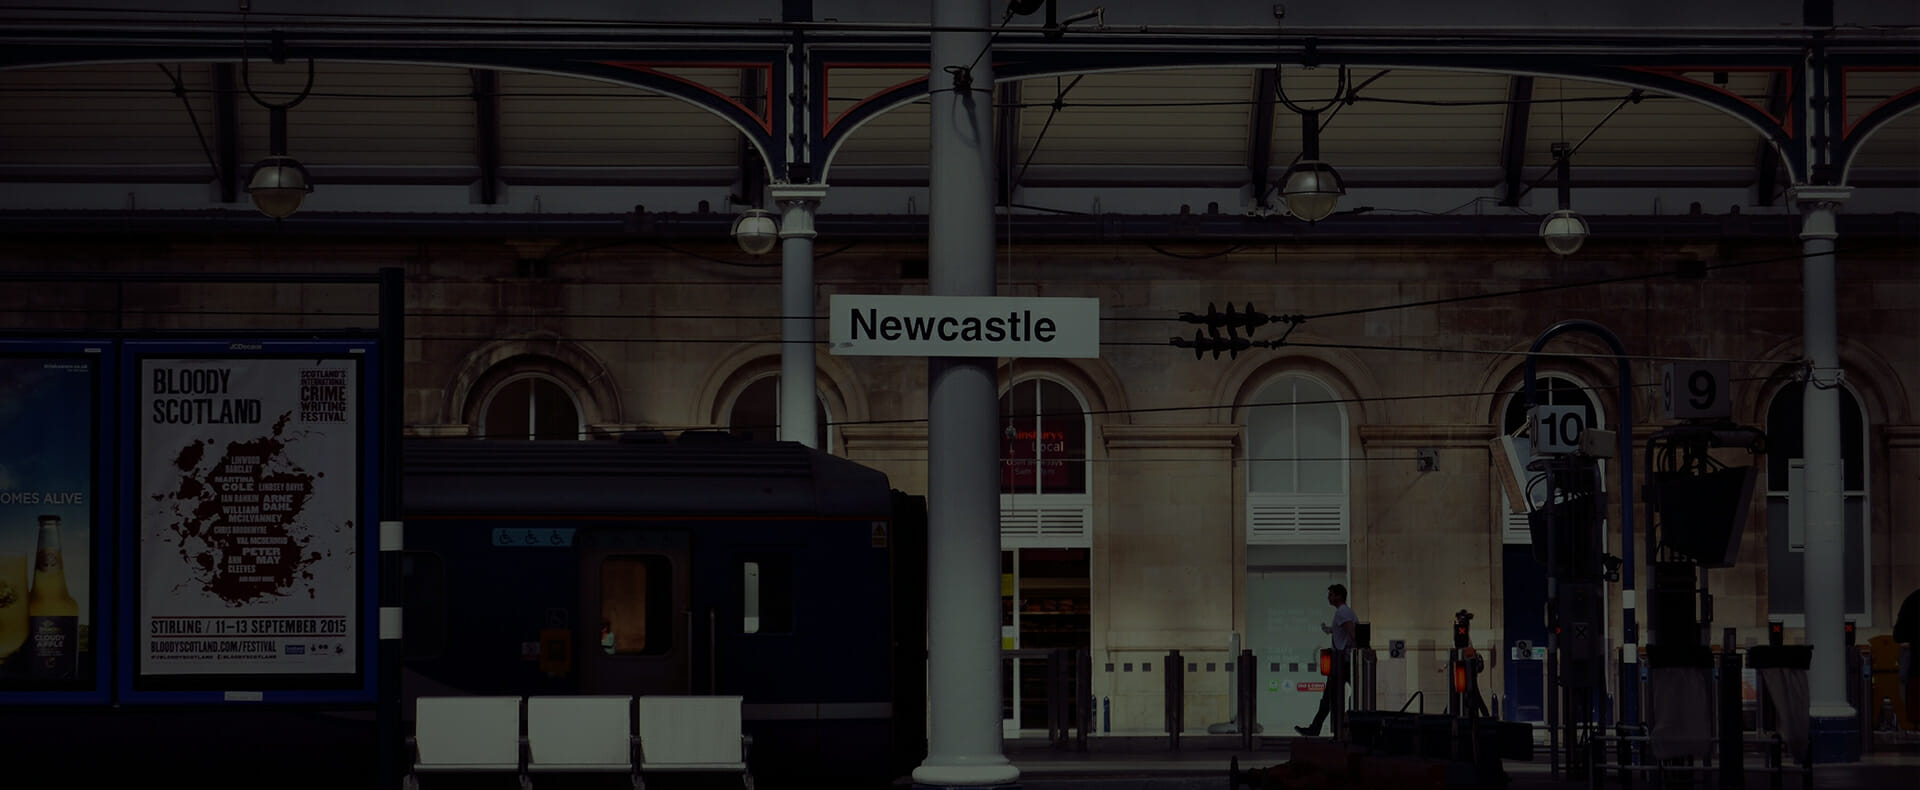 newcastle central station platform 10 with a sign and passengers walking in the background